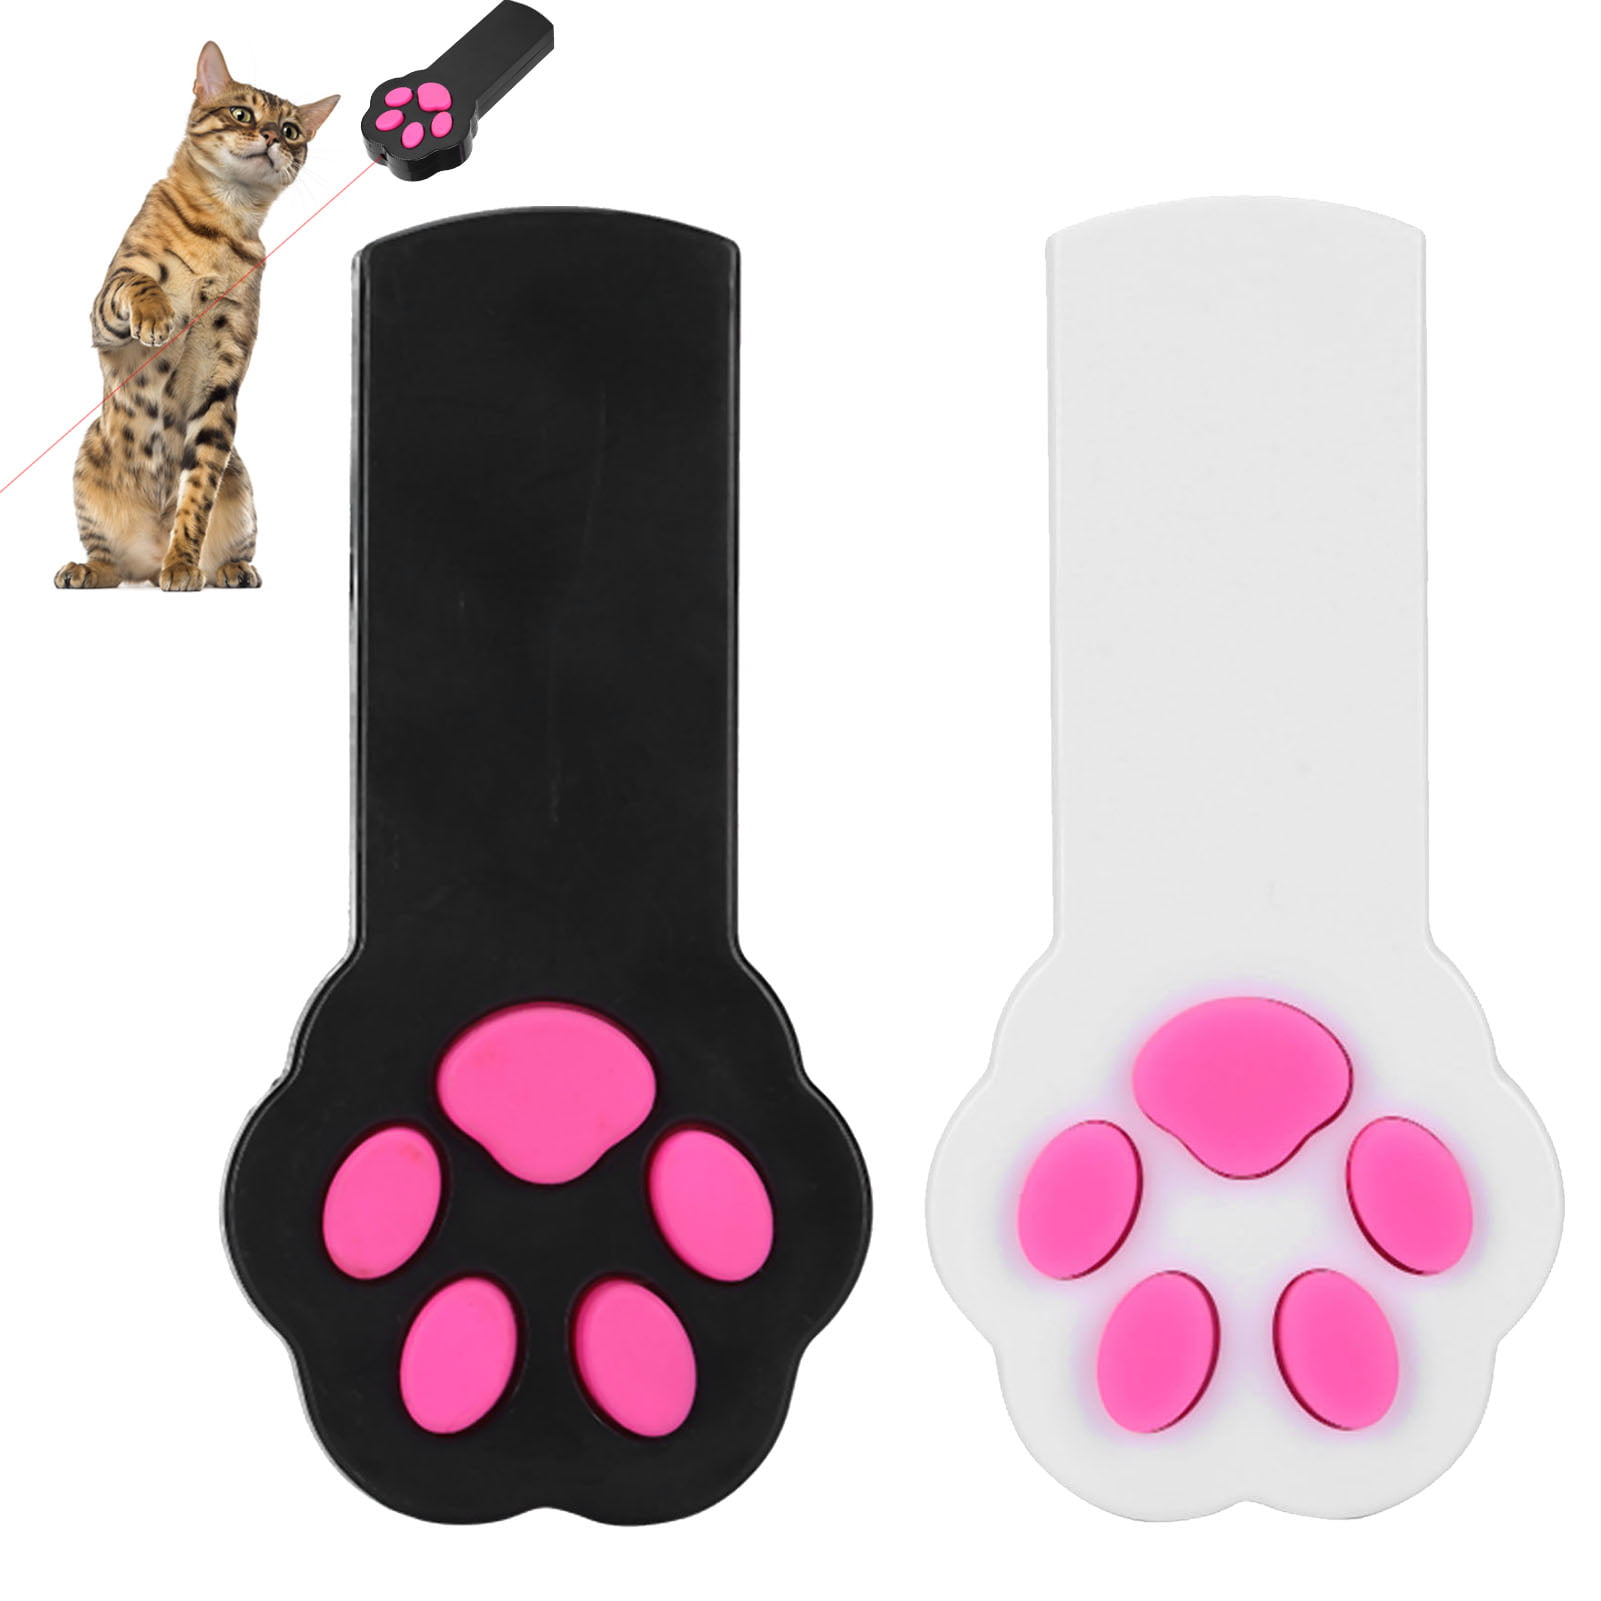 ZDYS Cat Chasing Light Point Pen Red Portable Funny Pet Cat Infrared Interactive Chase Bright Animation Light Pointer